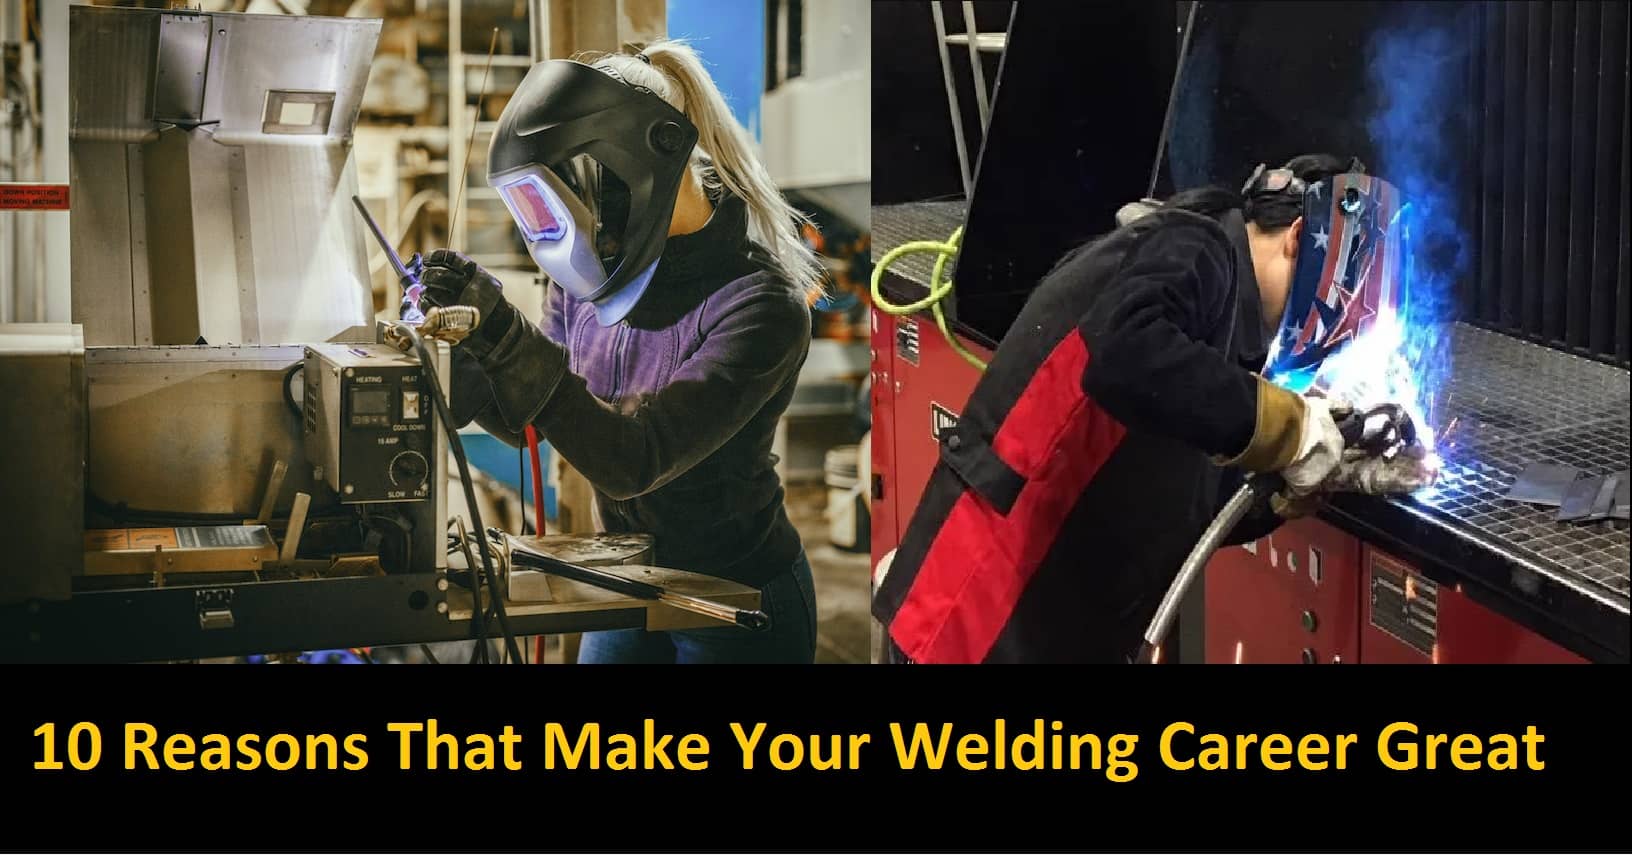 Reasons That Make Your Welding Career Great